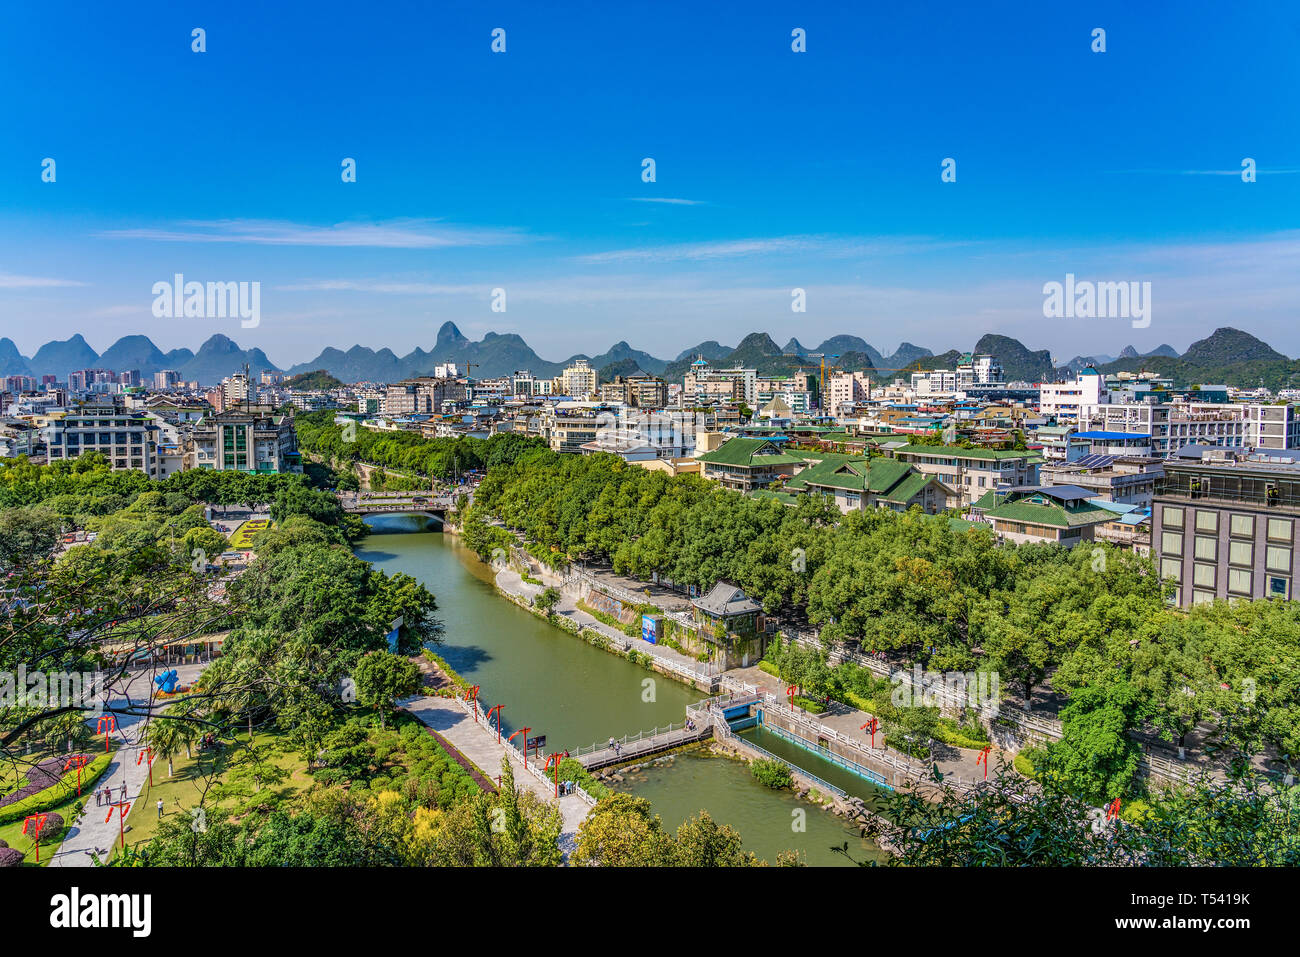 GUILIN, CHINA - NOVEMBER 01: This is a scenic view of Guilin city taken from Elephant Trunk Hill, a popular travel destination on November 01, 2018 in Stock Photo